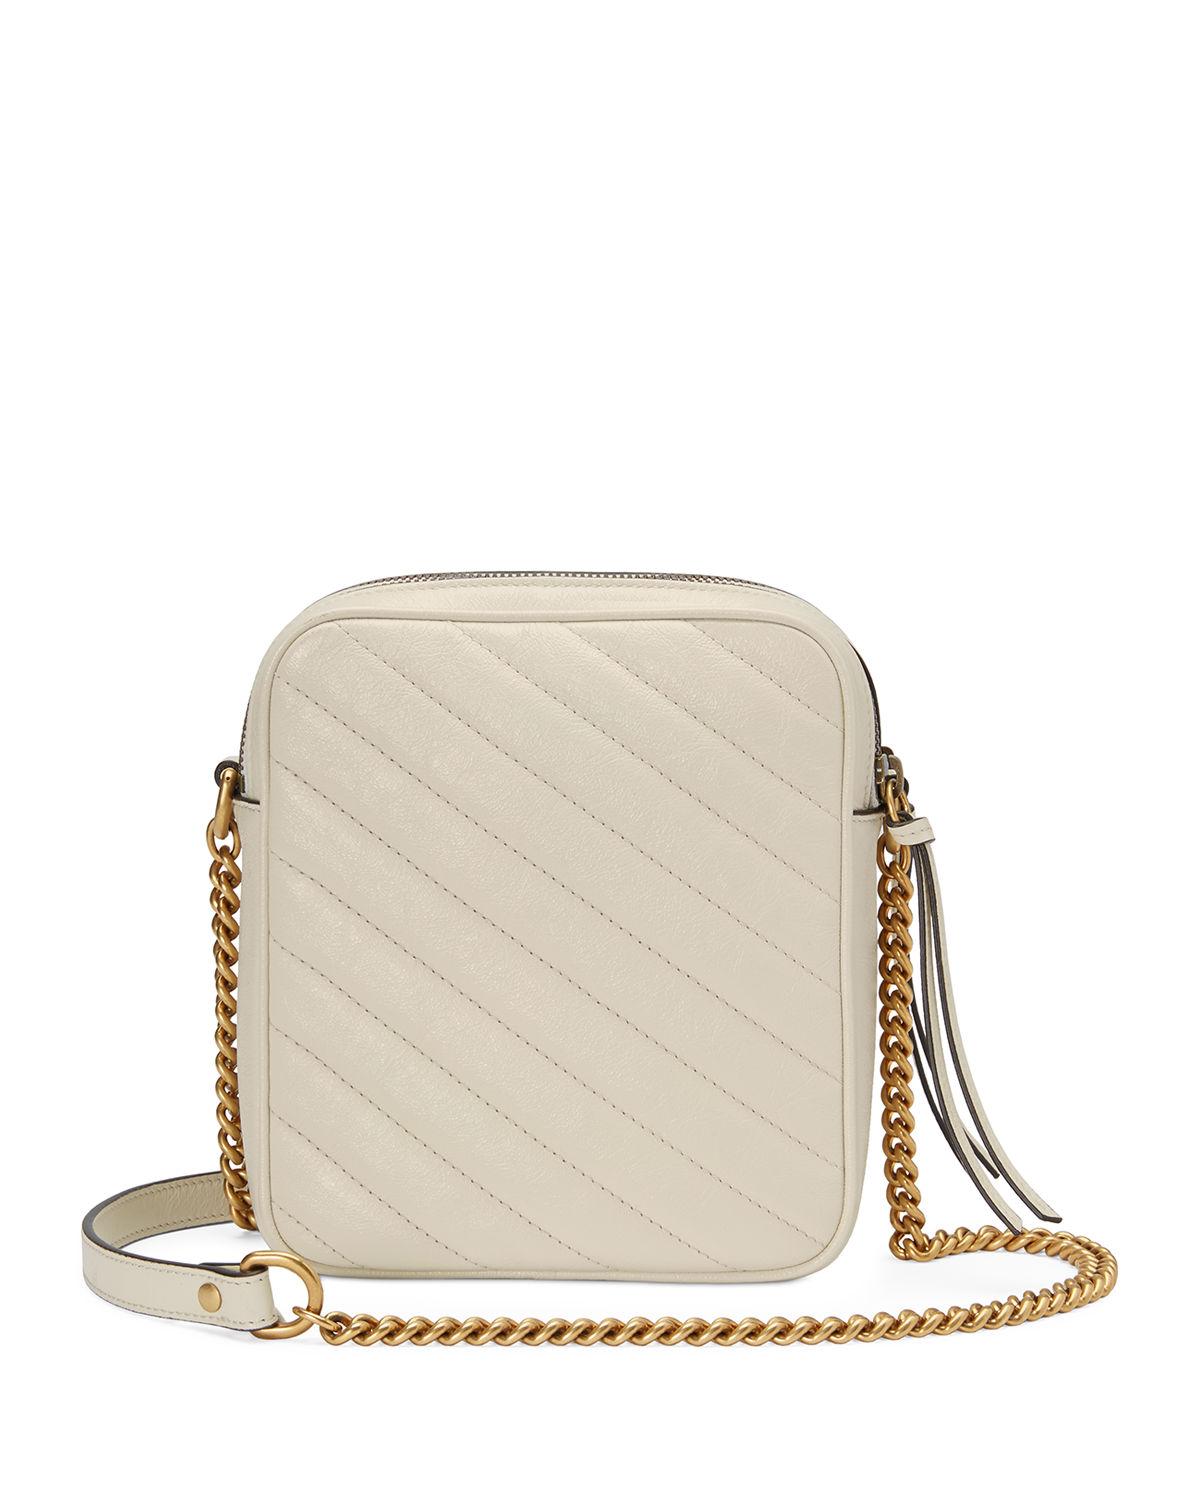 Gucci GG Marmont Tall Chevron Leather Crossbody Bag in White - Lyst